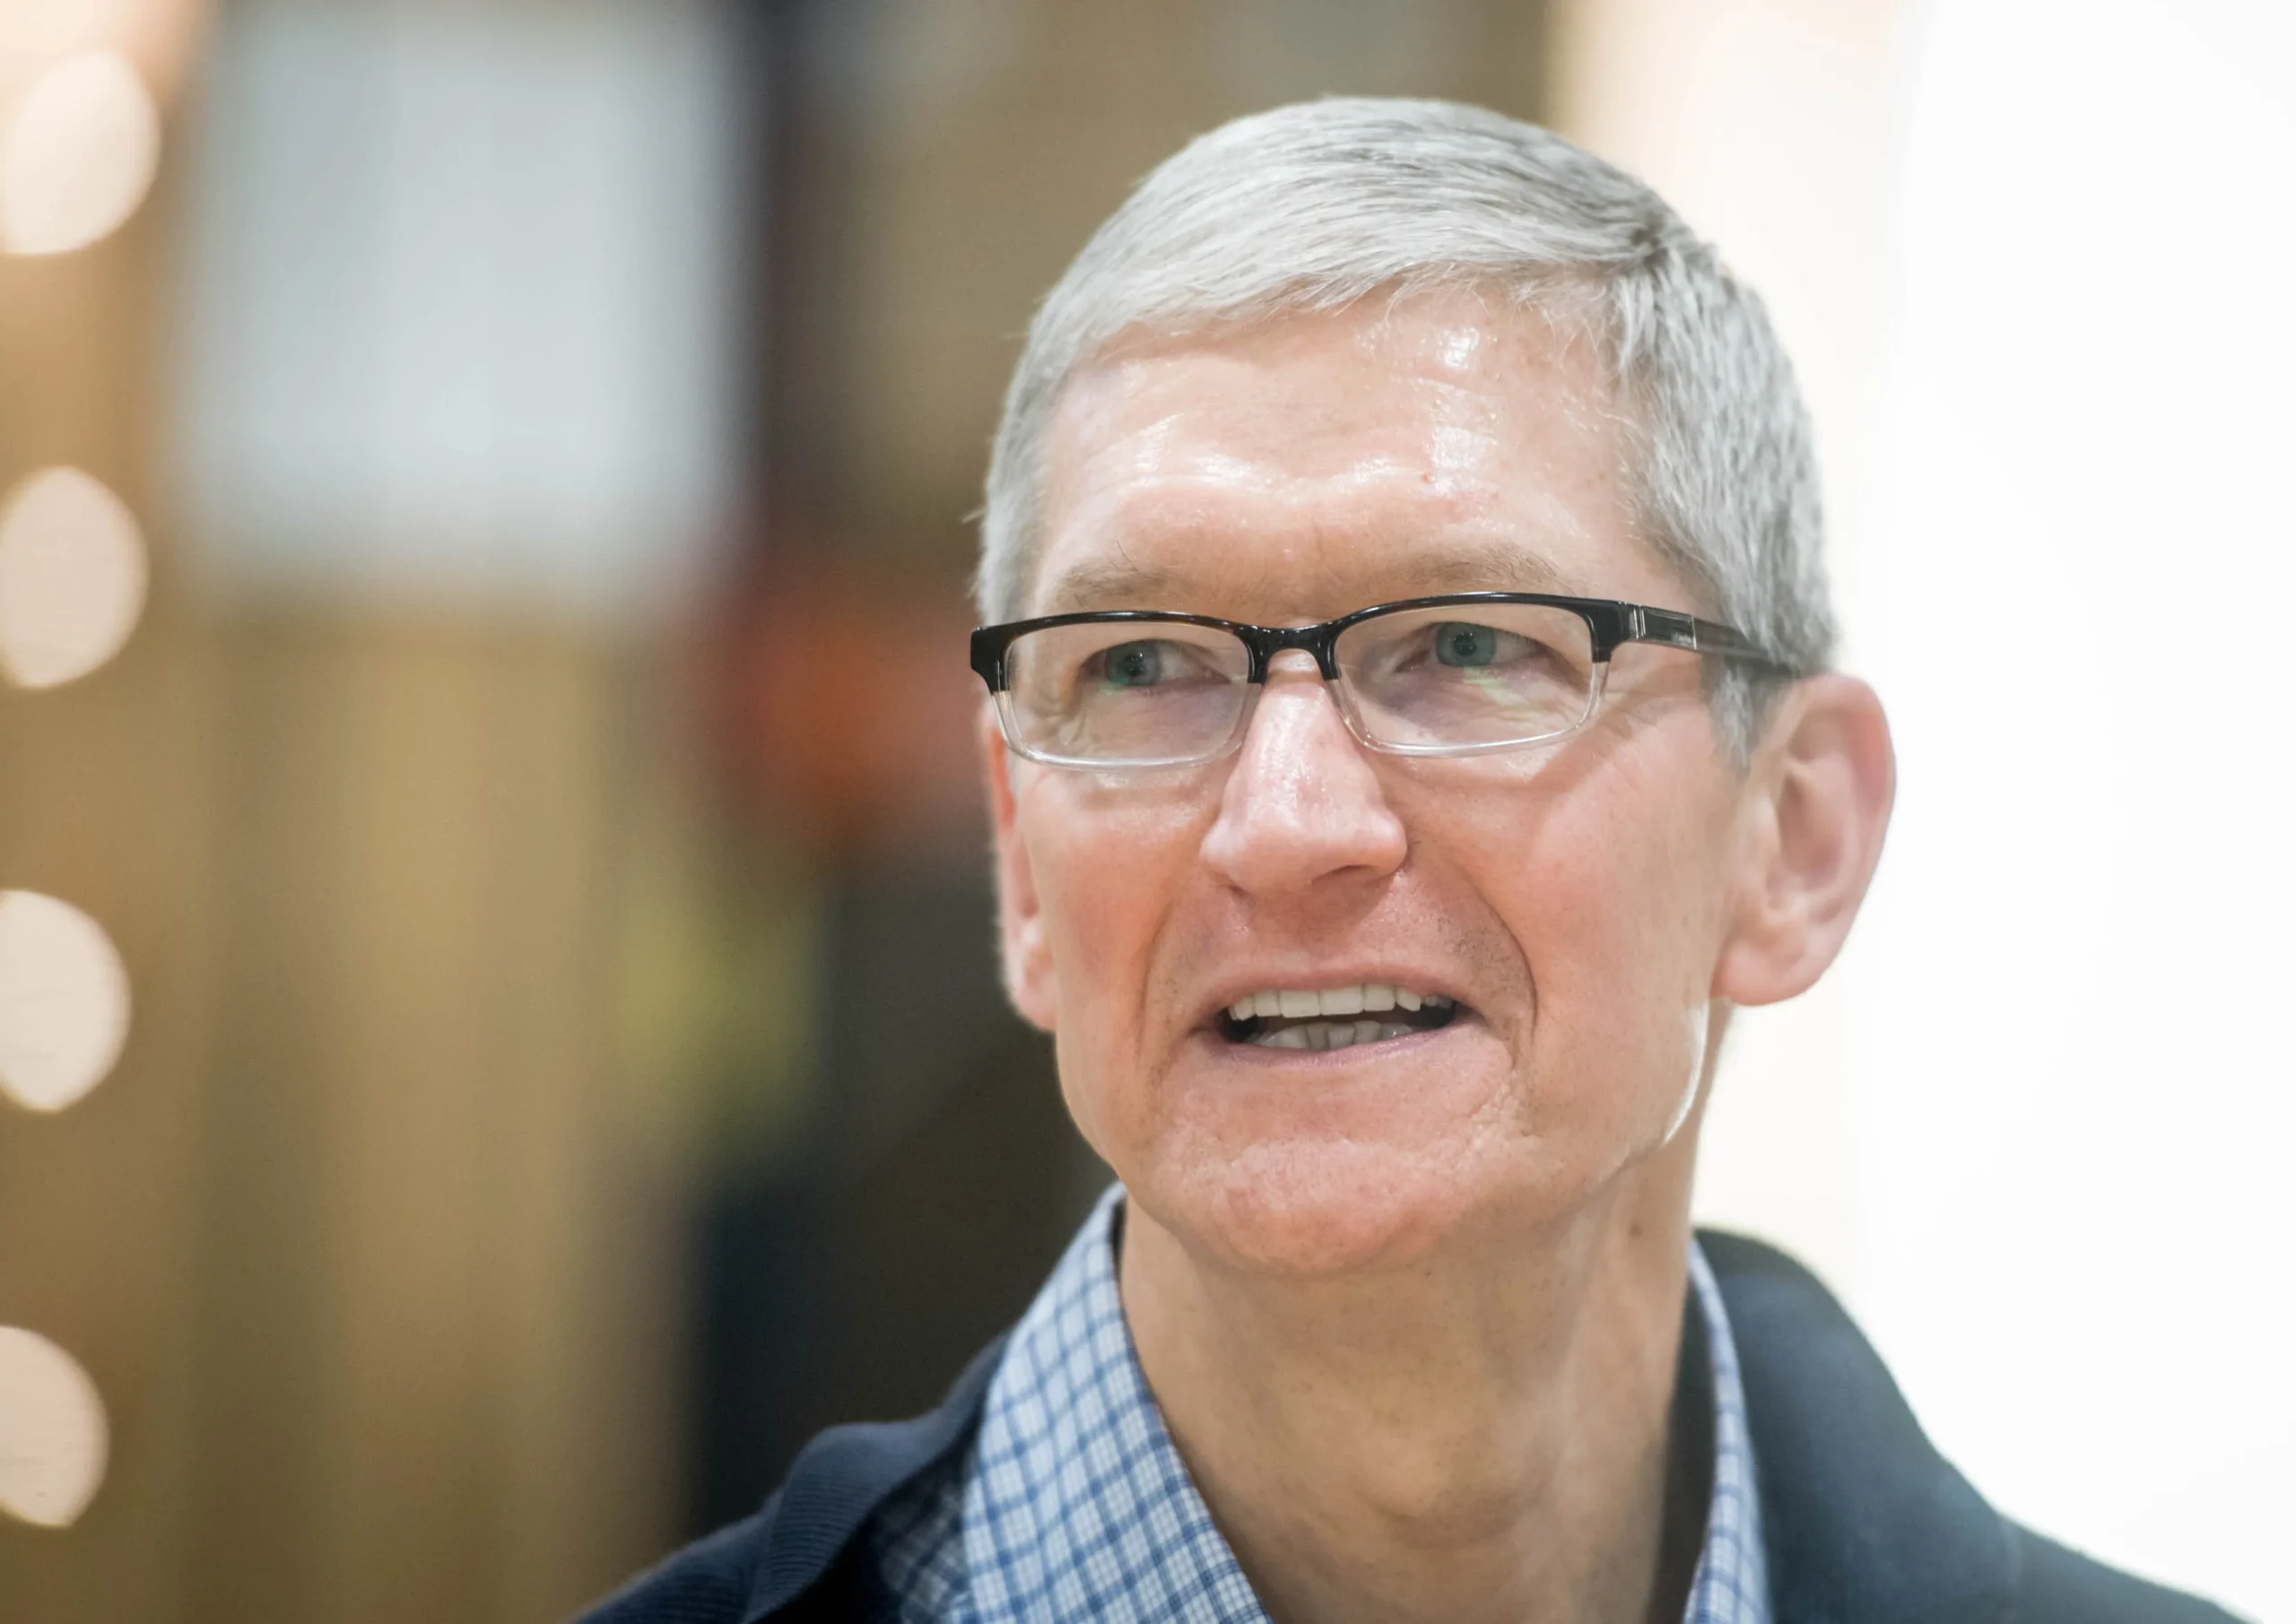 Apple's Big Move: Tim Cook's Bold Bet to Win Back Asia Amid Tech Tussles and Global Glare